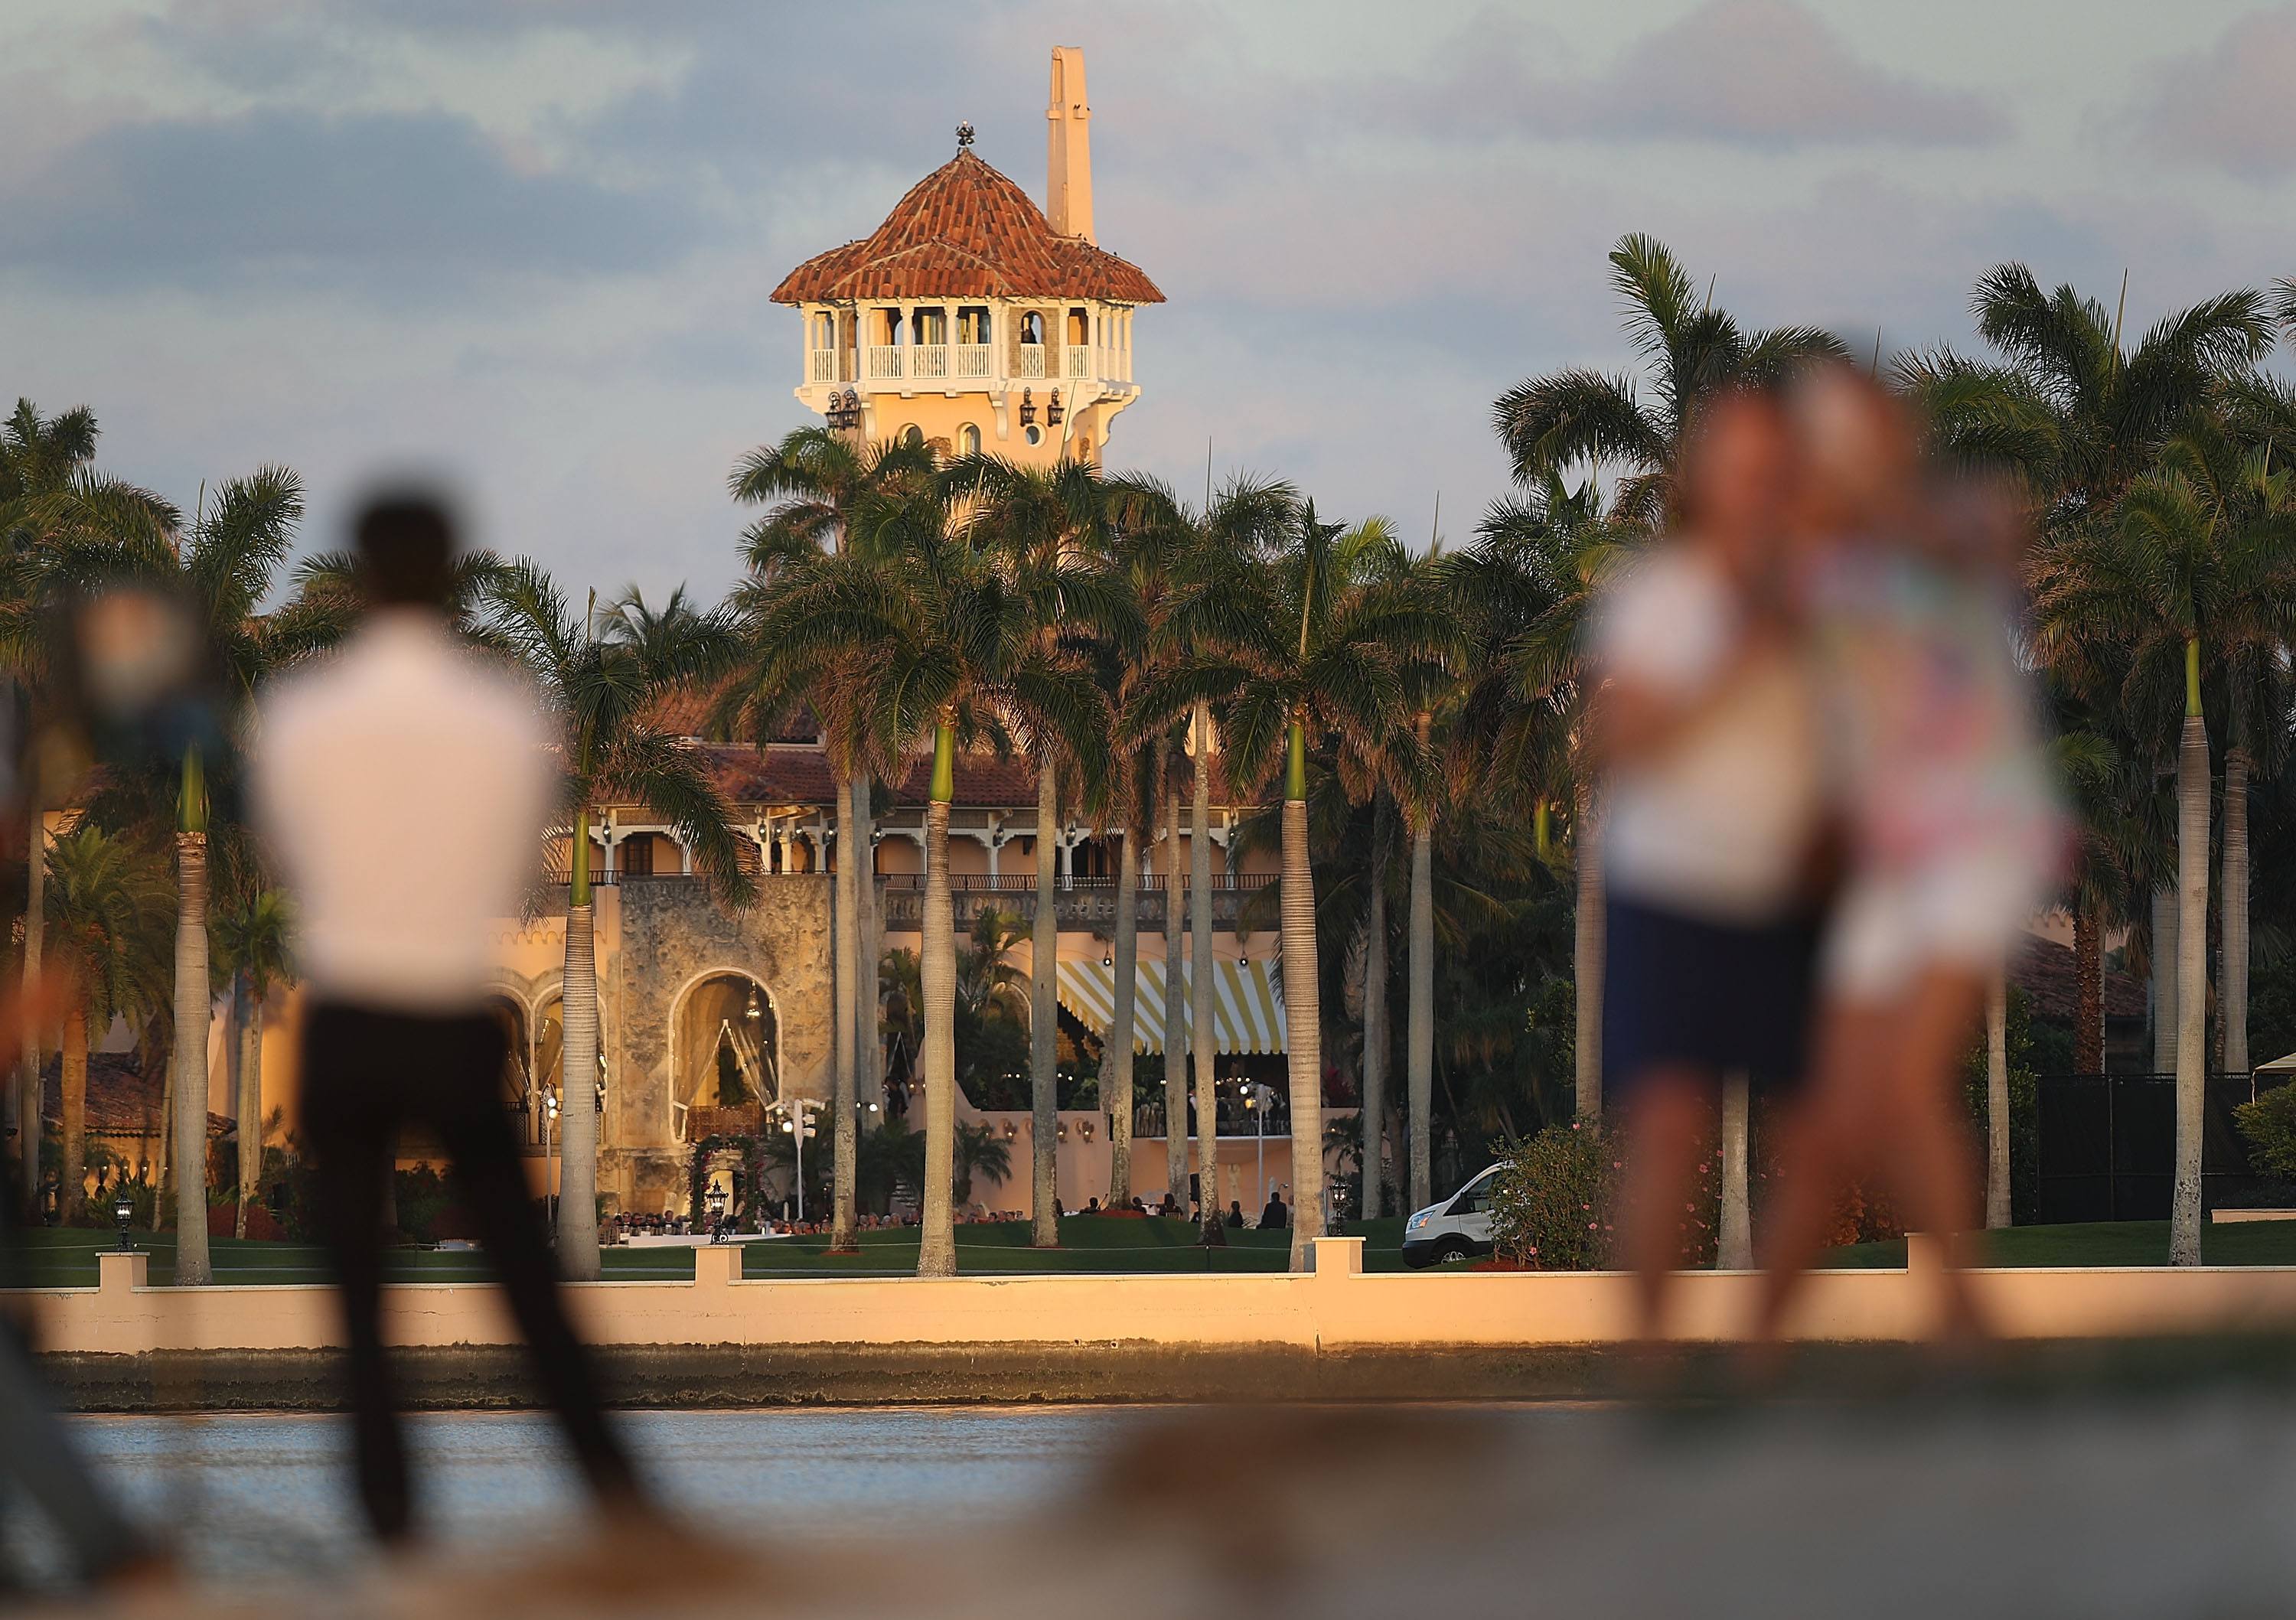 the mar a lago resort, which donald trump owns in florida